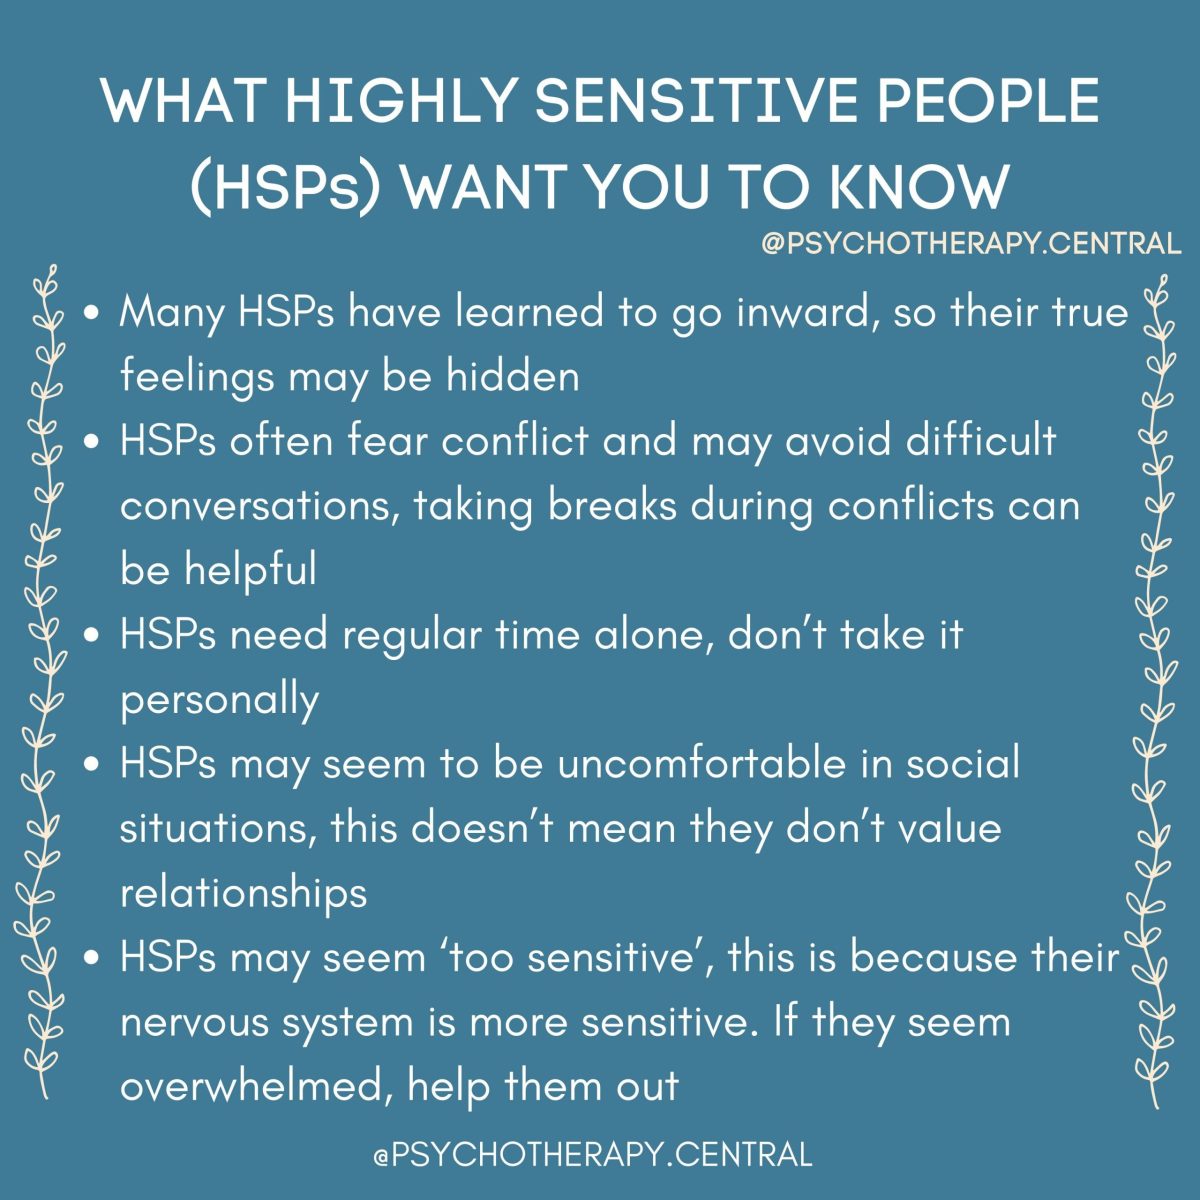 What Does Sensitive Mean in a Relationship